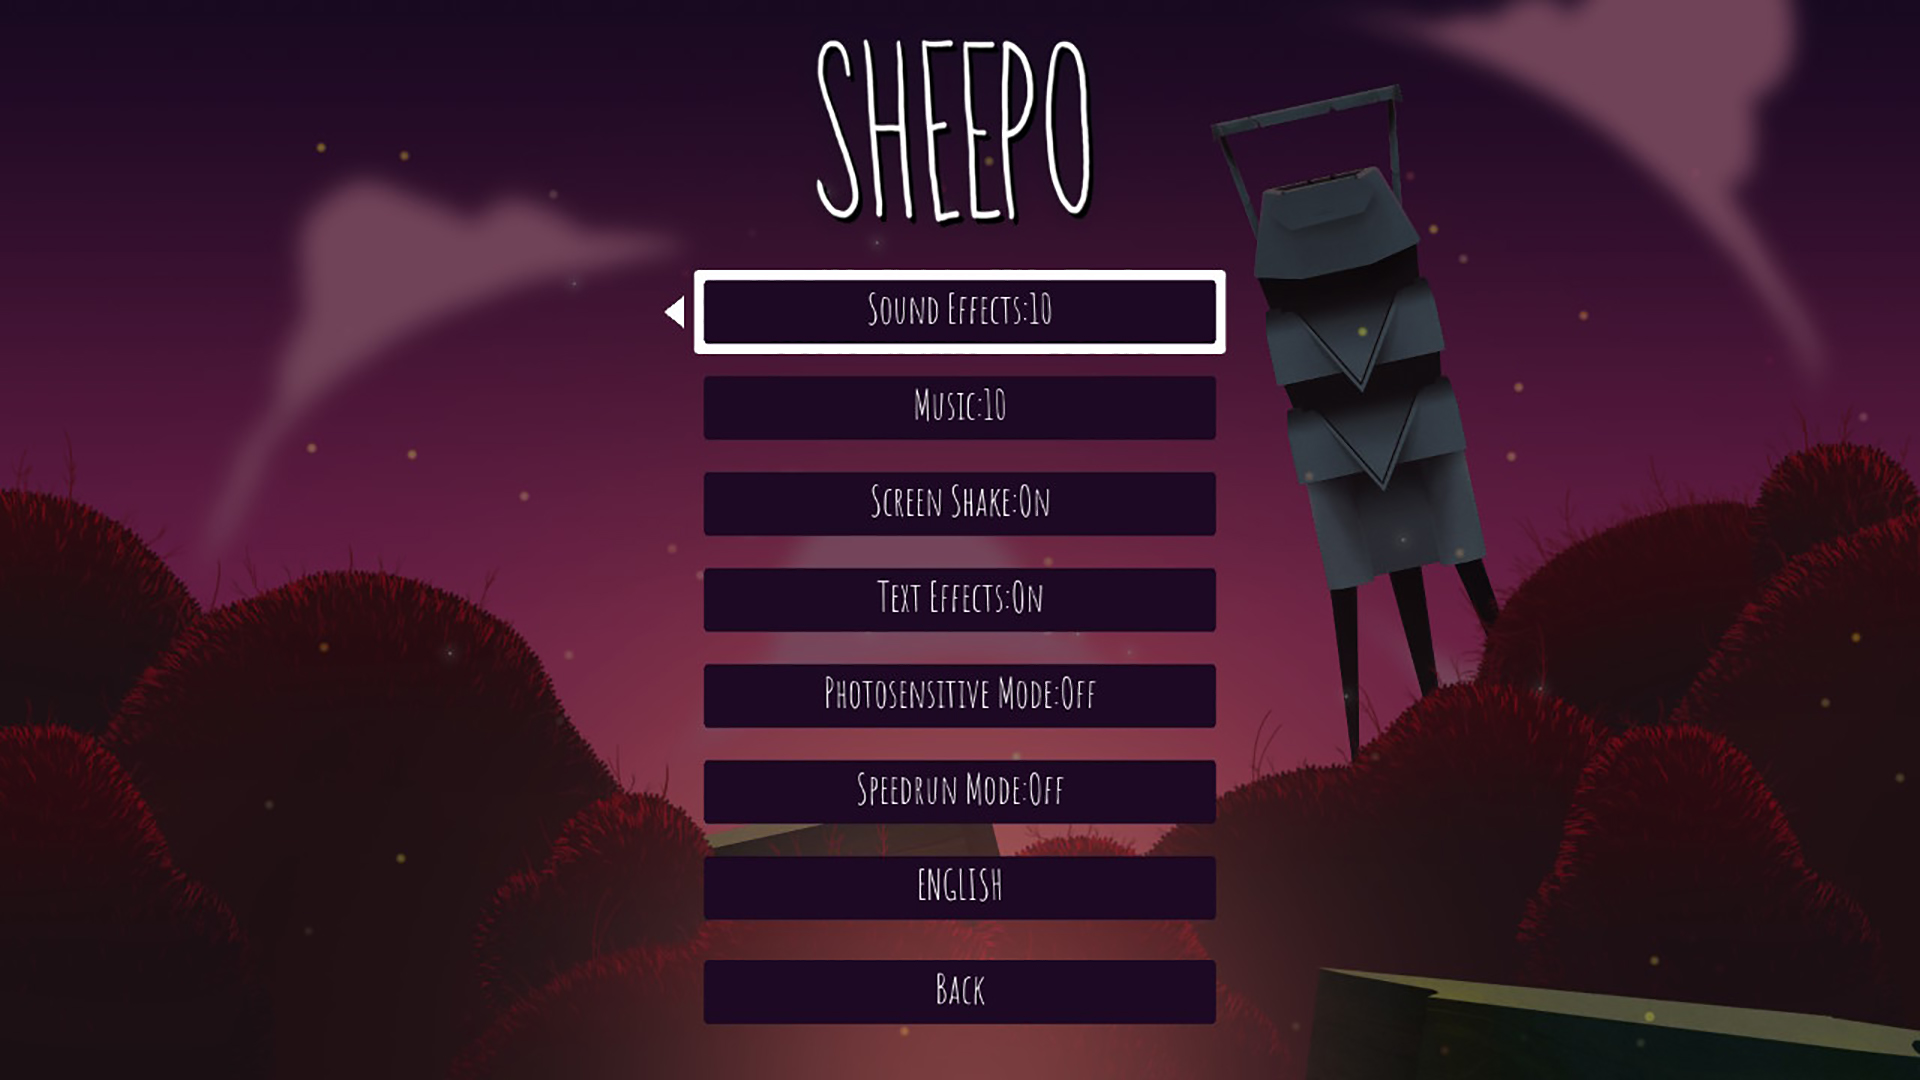 Sheepo (Review) - Cat with Monocle